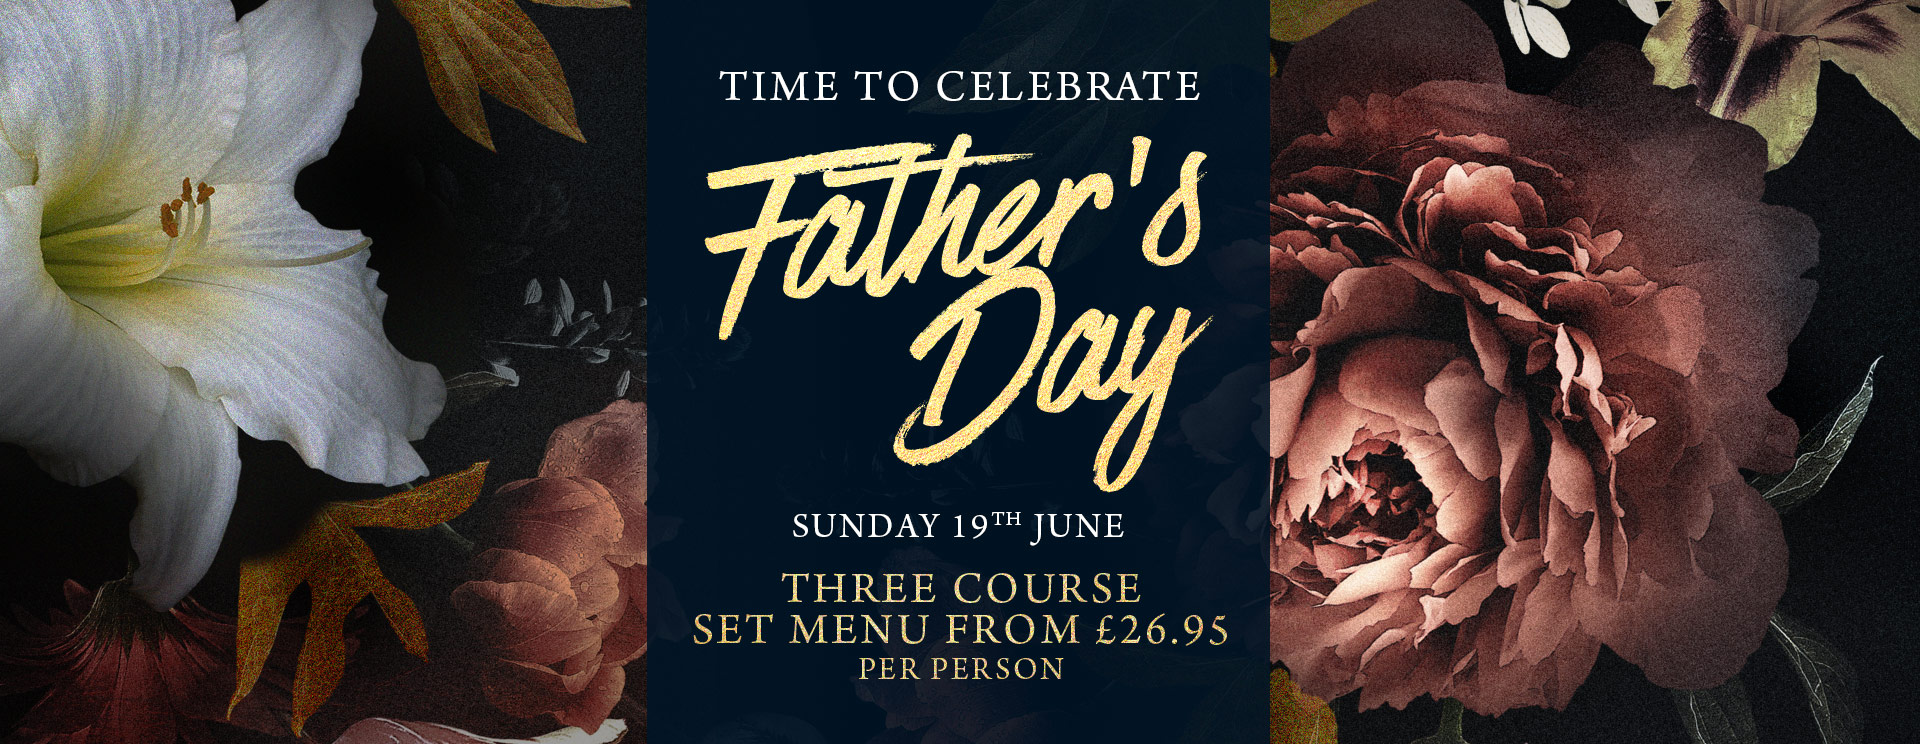 Fathers Day at The Freemasons Arms